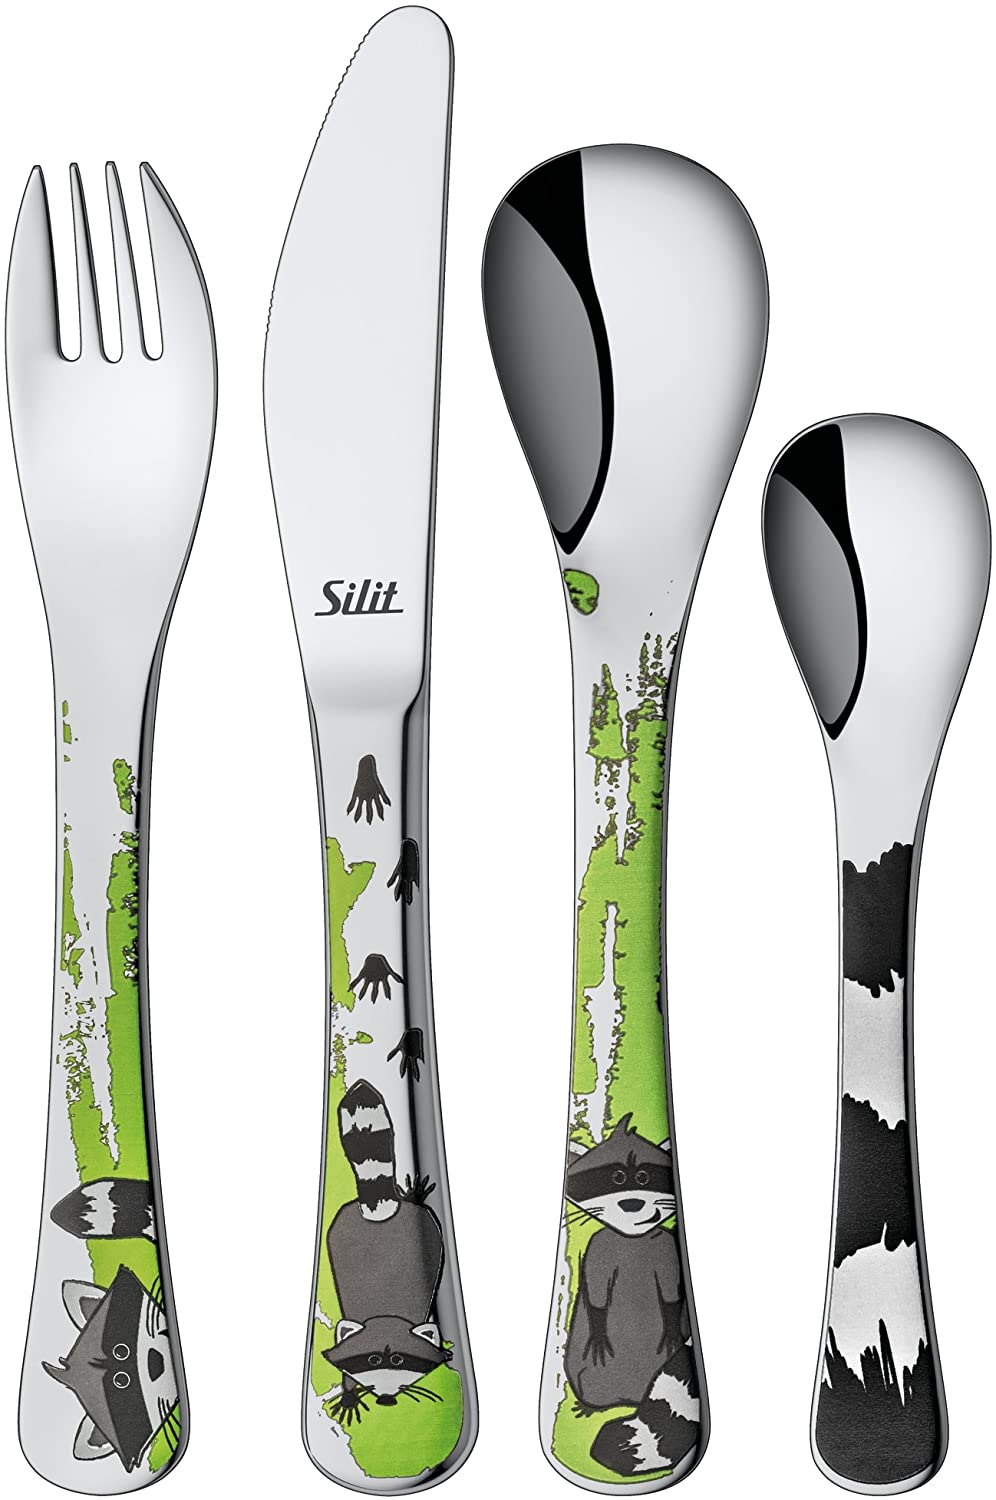 Silit Raccoon children\'s cutlery, 4 pieces, with name engraving, from 3 years, crominox polished stainless steel, engraving gift for christening or birthday